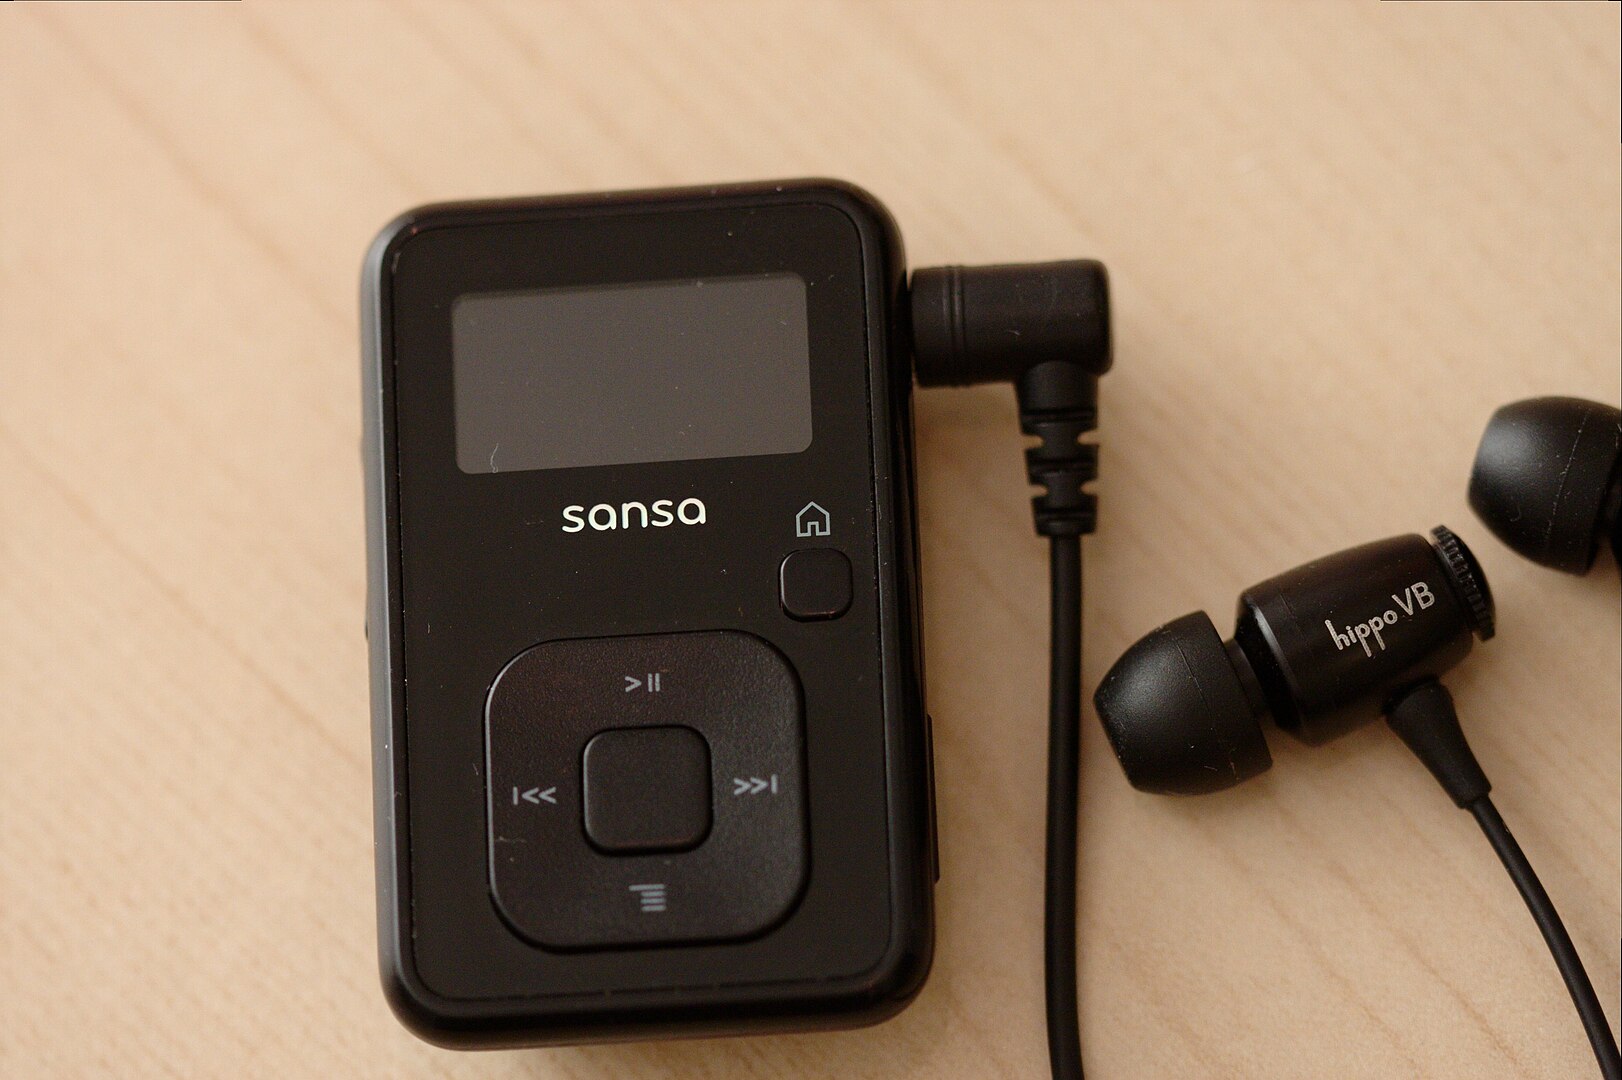 How To Download Music Onto Sandisk MP3 Player